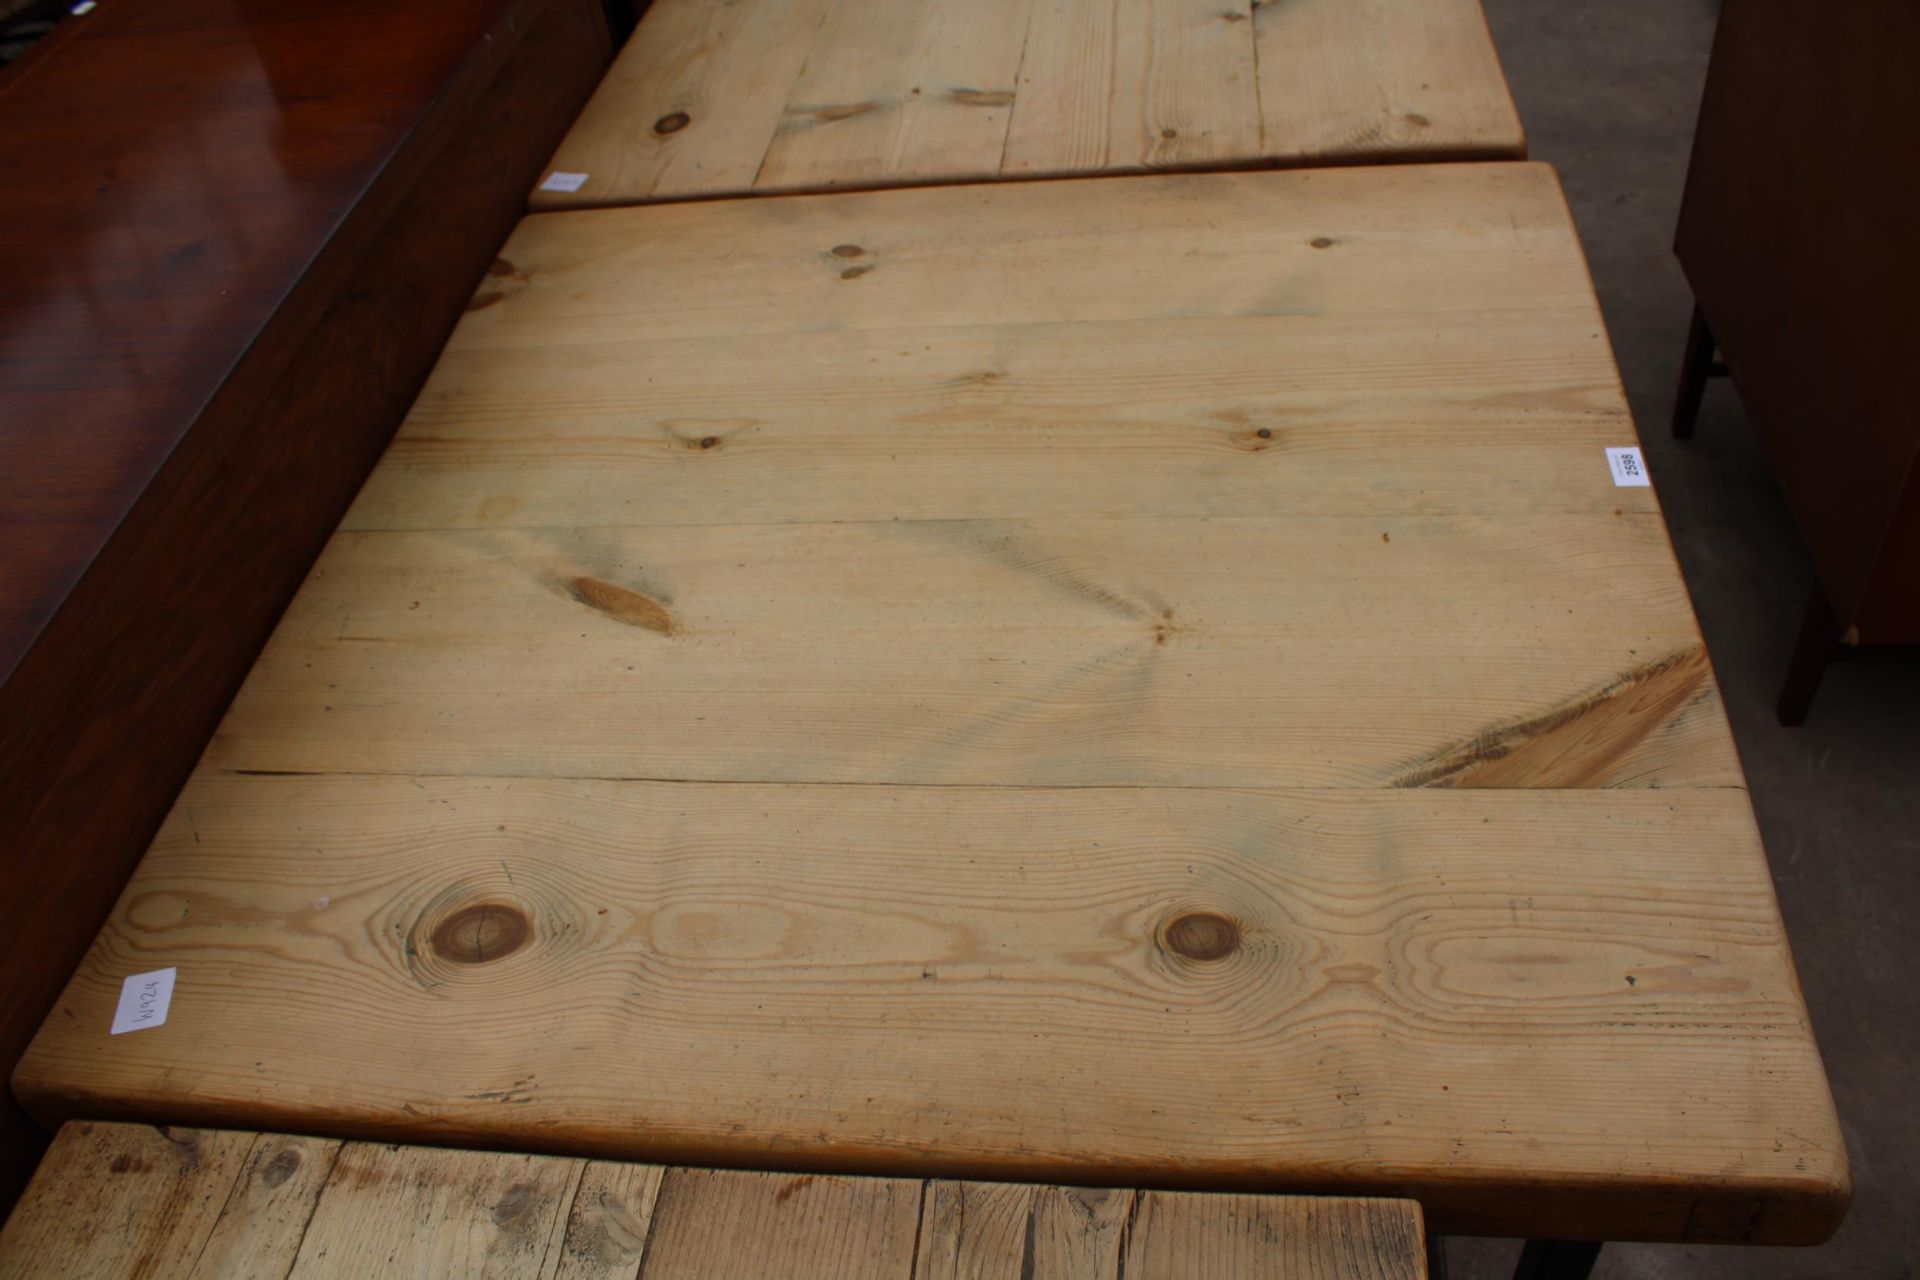 A RUSTIC FOUR PLANK TABLE, 35" SQUARE ON METAL LEGS - Image 2 of 2